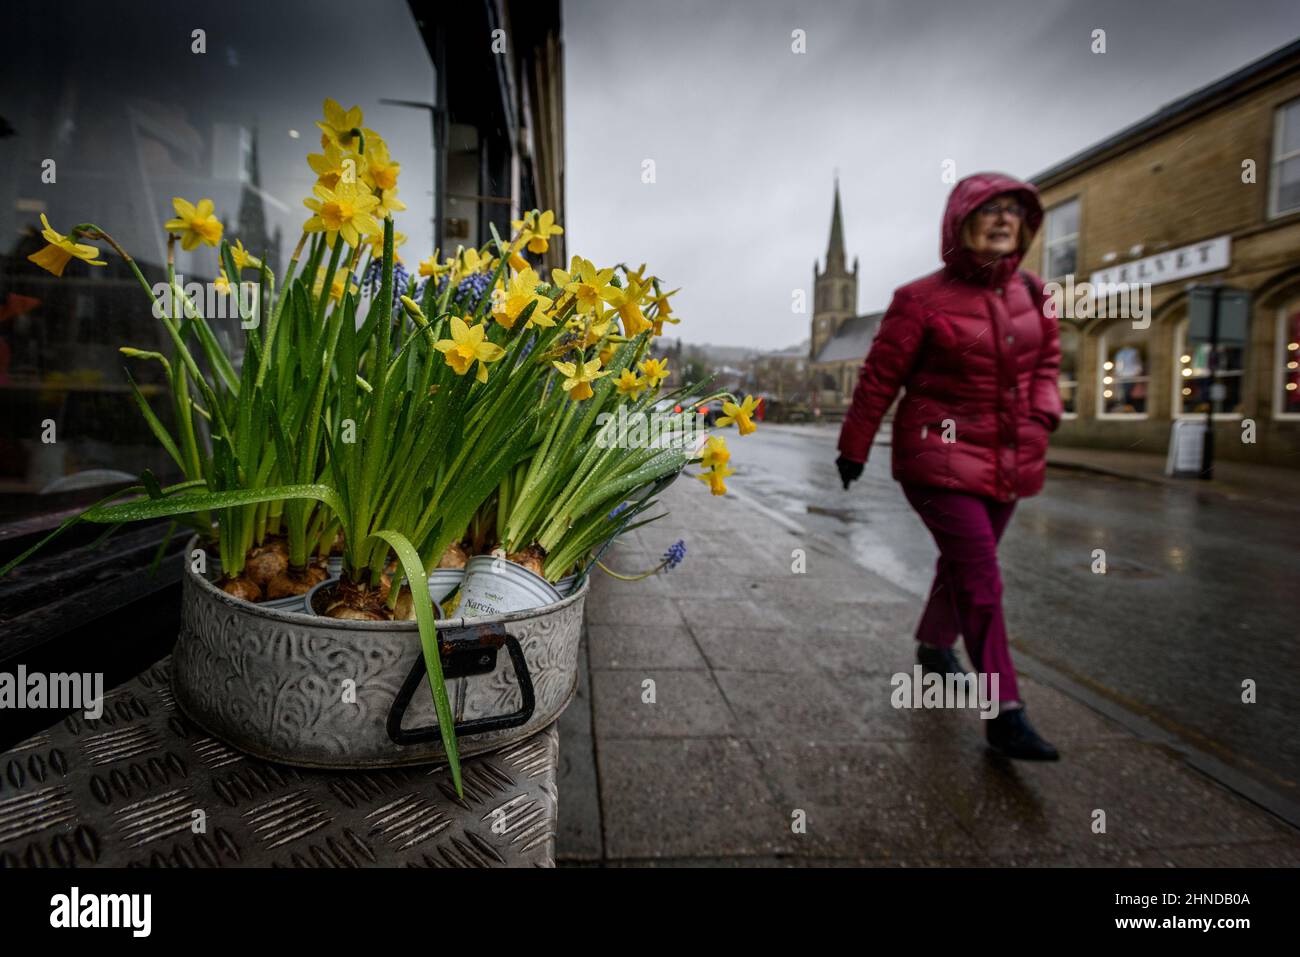 Ramsbottom, Lancashire, UK, Wednesday February 16, 2022. The start of Storm Dudley hits the North West of England on Bridge Street, Ramsbottom, Lancashire. A rain sodden shopper passes a vibrant display of daffodils outside a florist shop. Credit: Paul Heyes/Alamy News Live Stock Photo